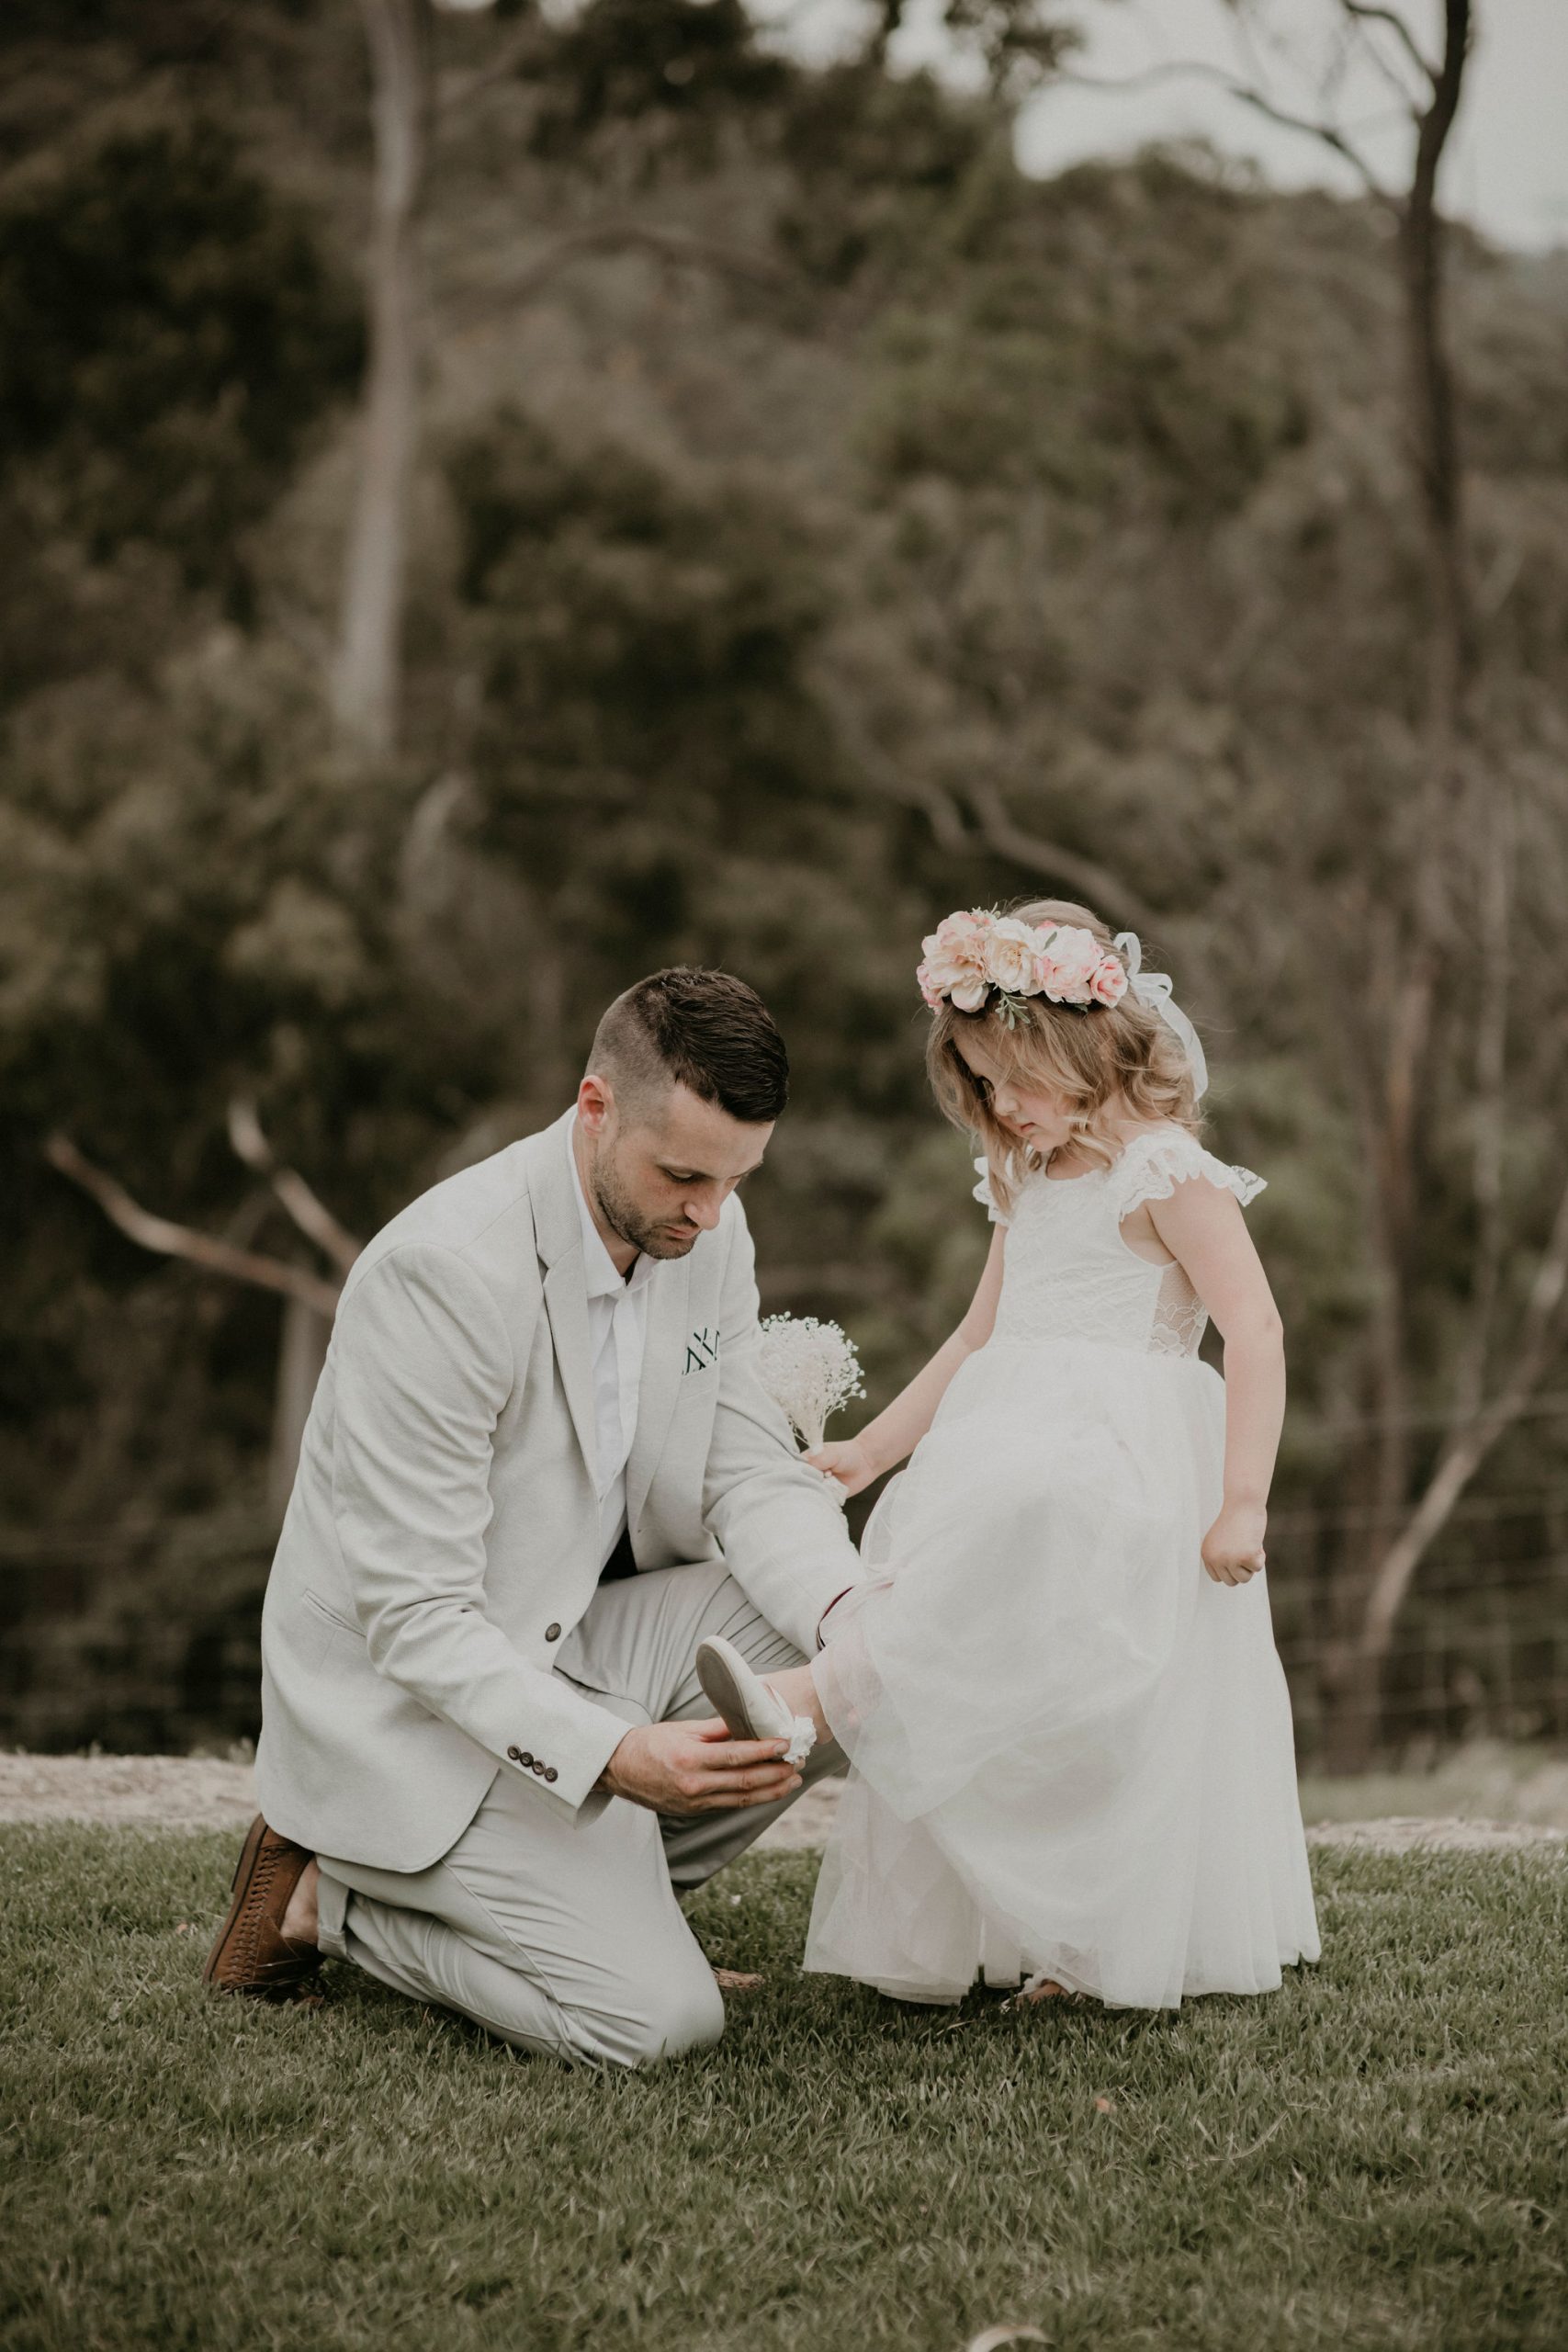 Lets-Elope-Melbourne-Celebrant-Photographer-Elopement-Package-Victoria-Sarah-Matler-Photography-Orchard-with-Kids-Farm-Vigano-weddings-intimate-15